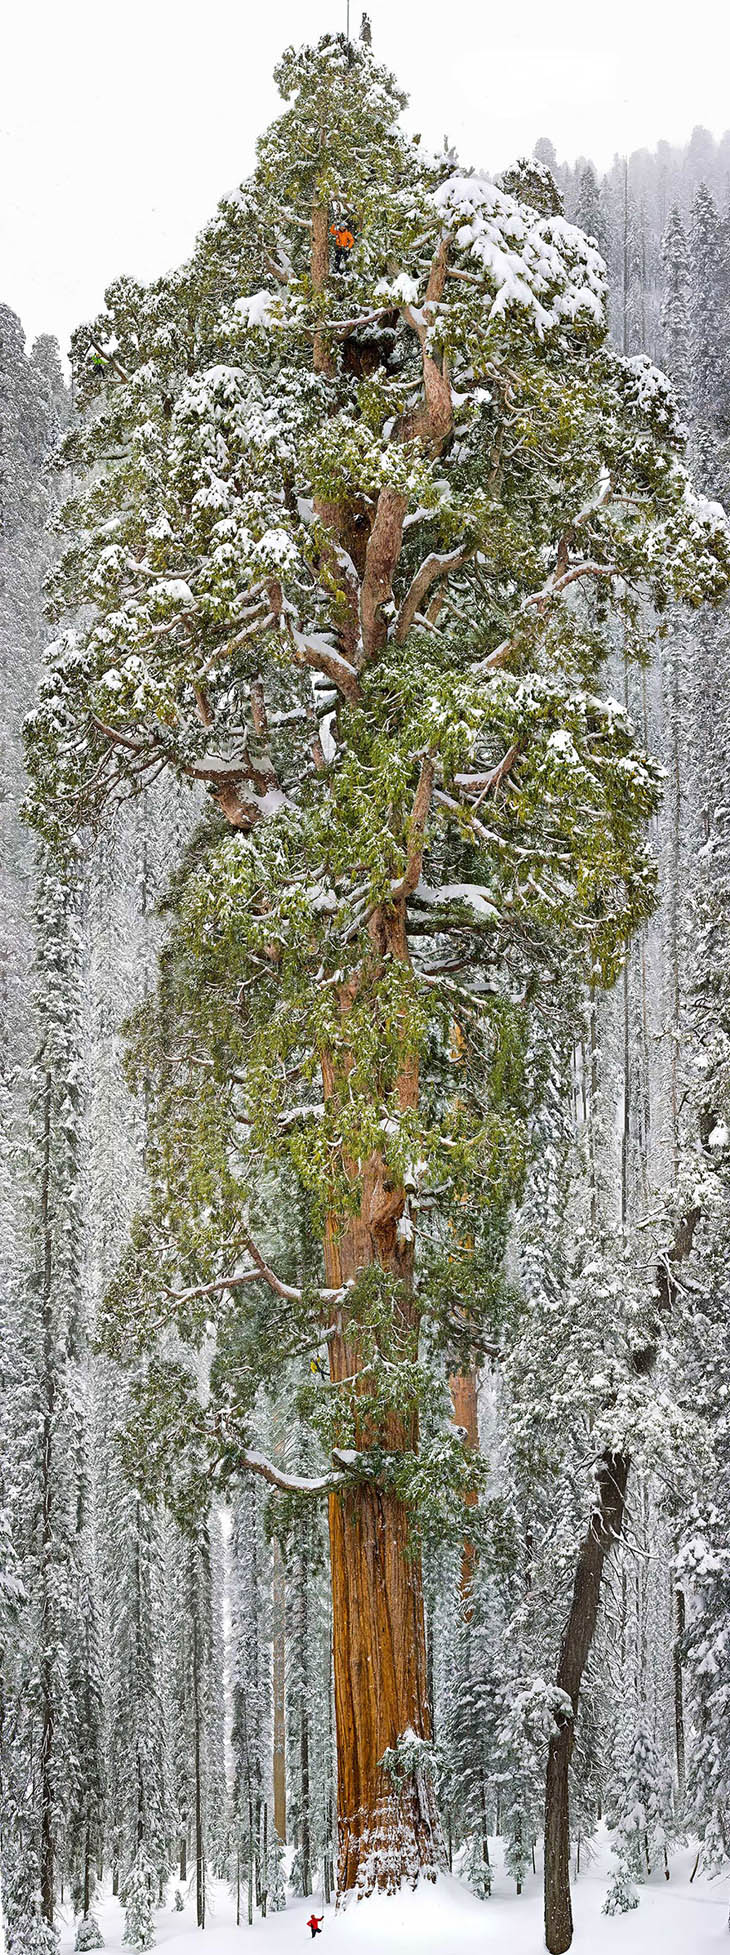 The President (Third-Largest Giant Sequoia Tree In The World), California